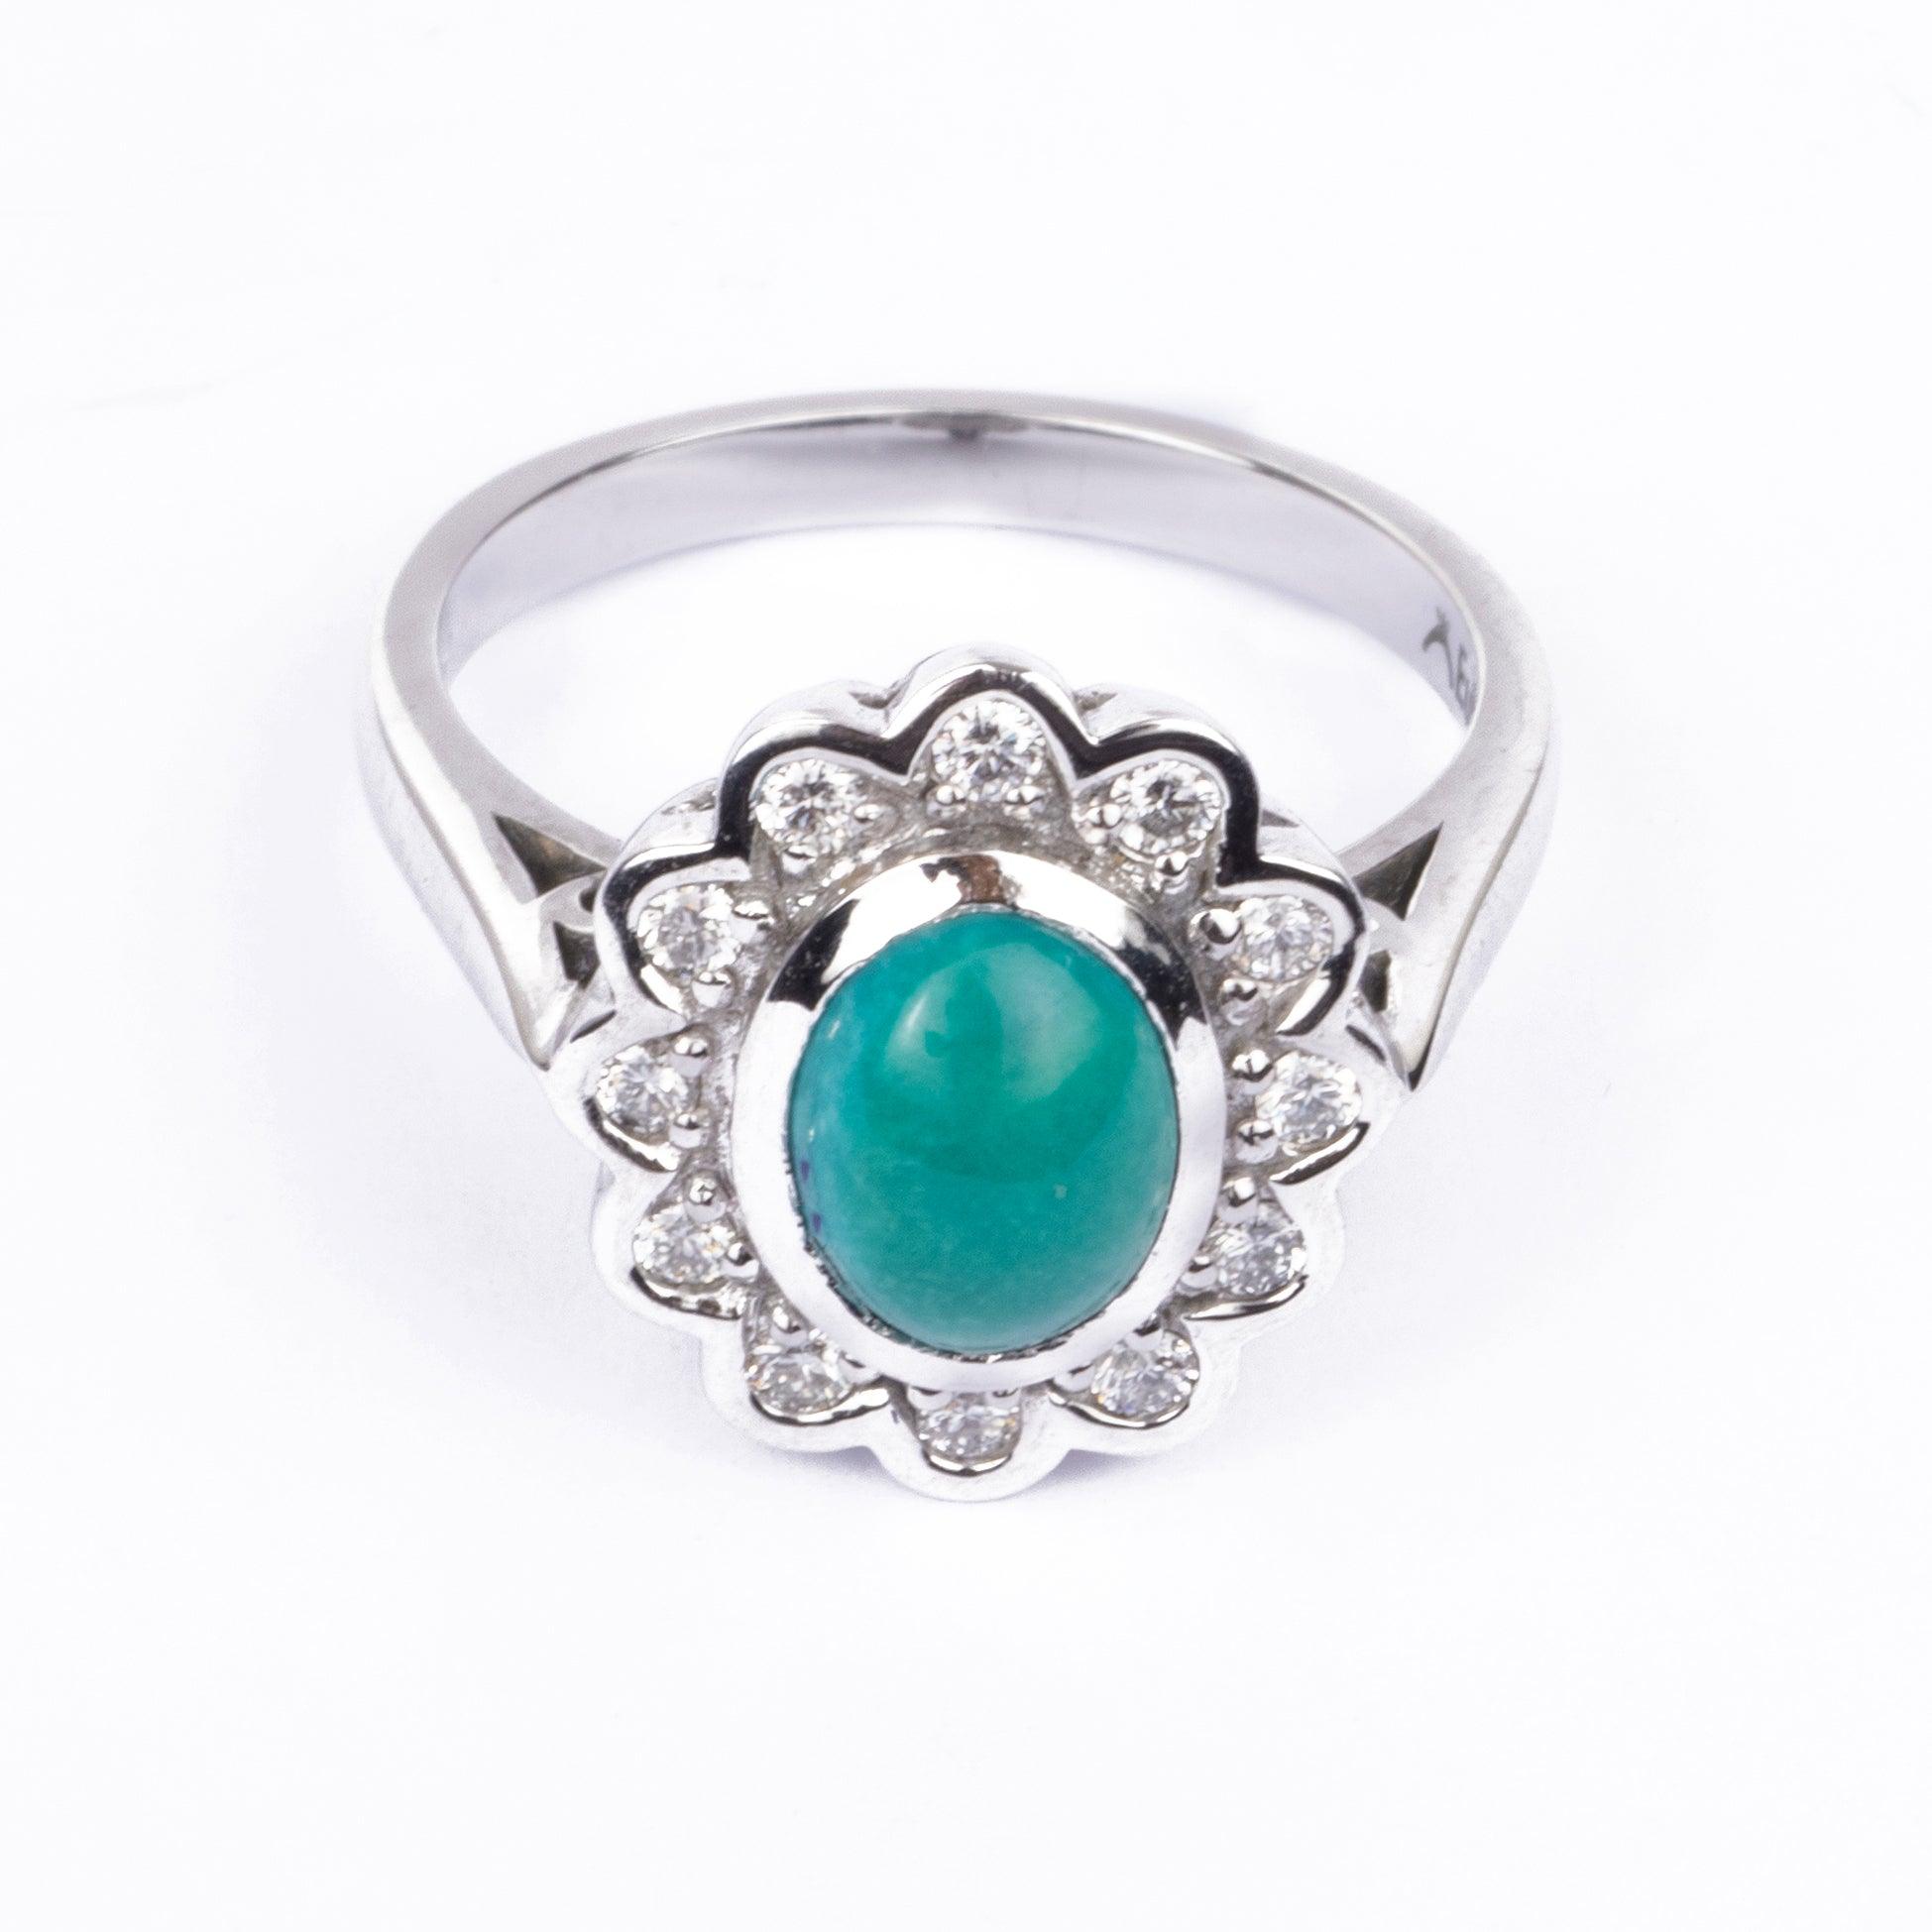 18ct White Gold Diamond and Turquoise Cocktail Ring LR-2971